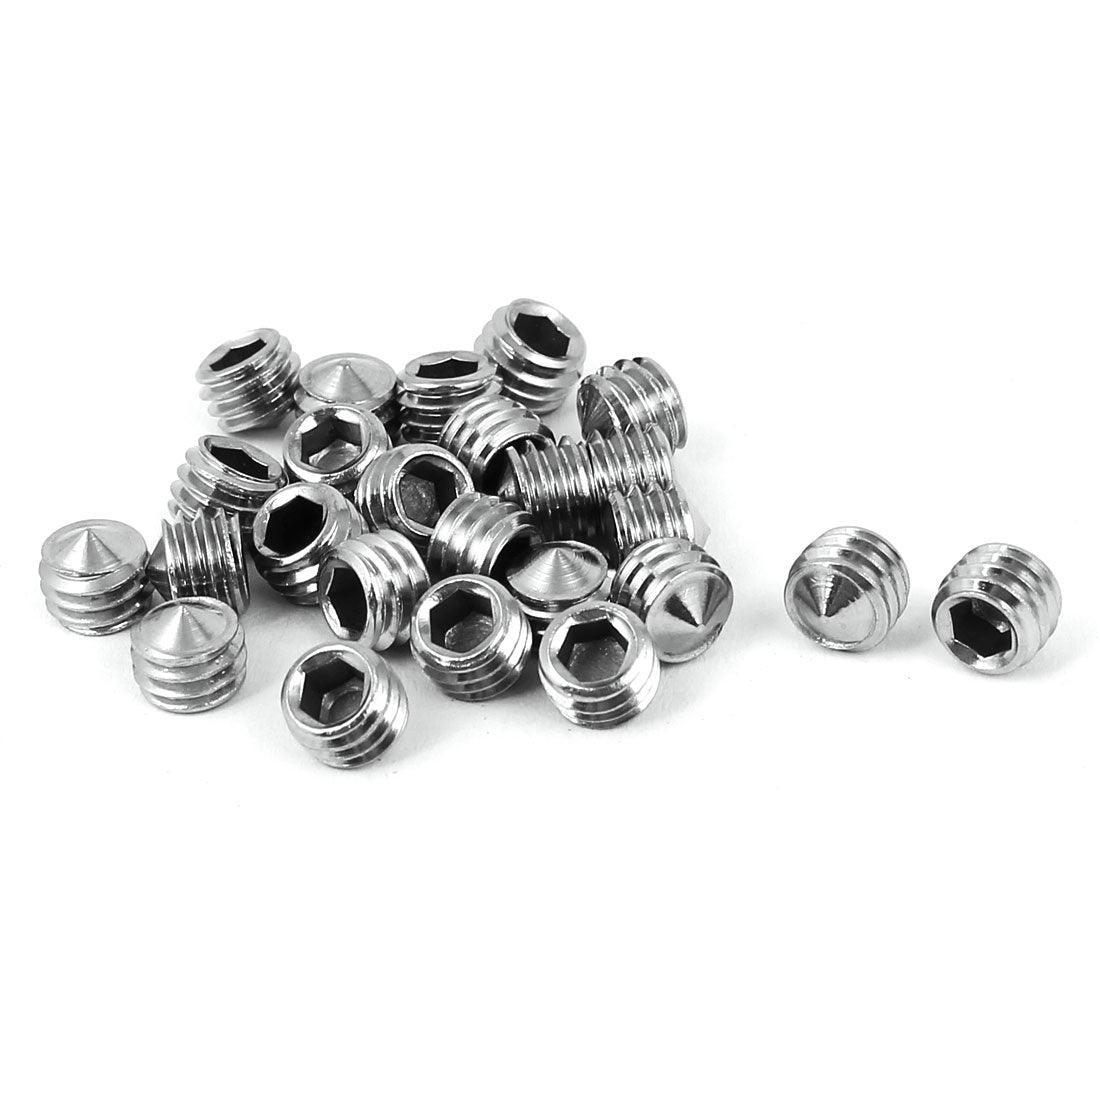 uxcell Uxcell M6 x 5mm 304 Stainless Steel Cone Point Hex Socket Set Grub Screw Silver Tone 25 Pcs